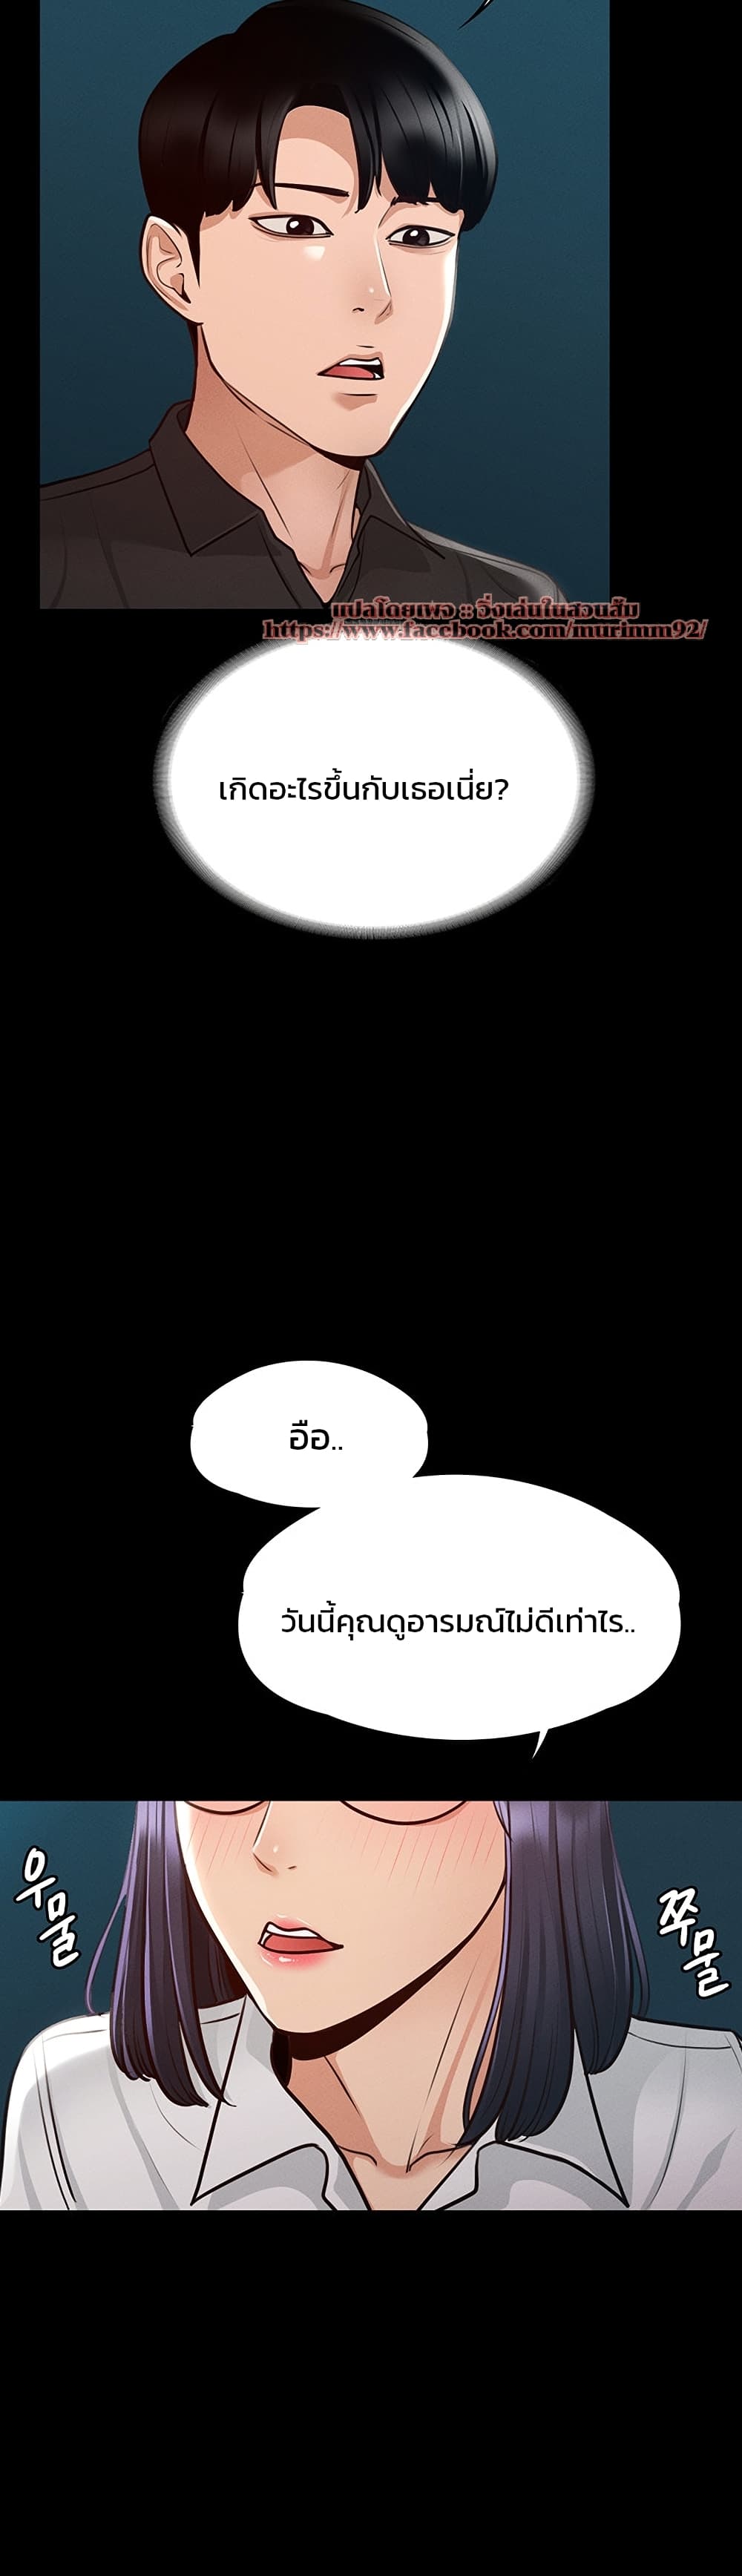 Workplace Manager Privileges ตอนที่ 5 ภาพ 44